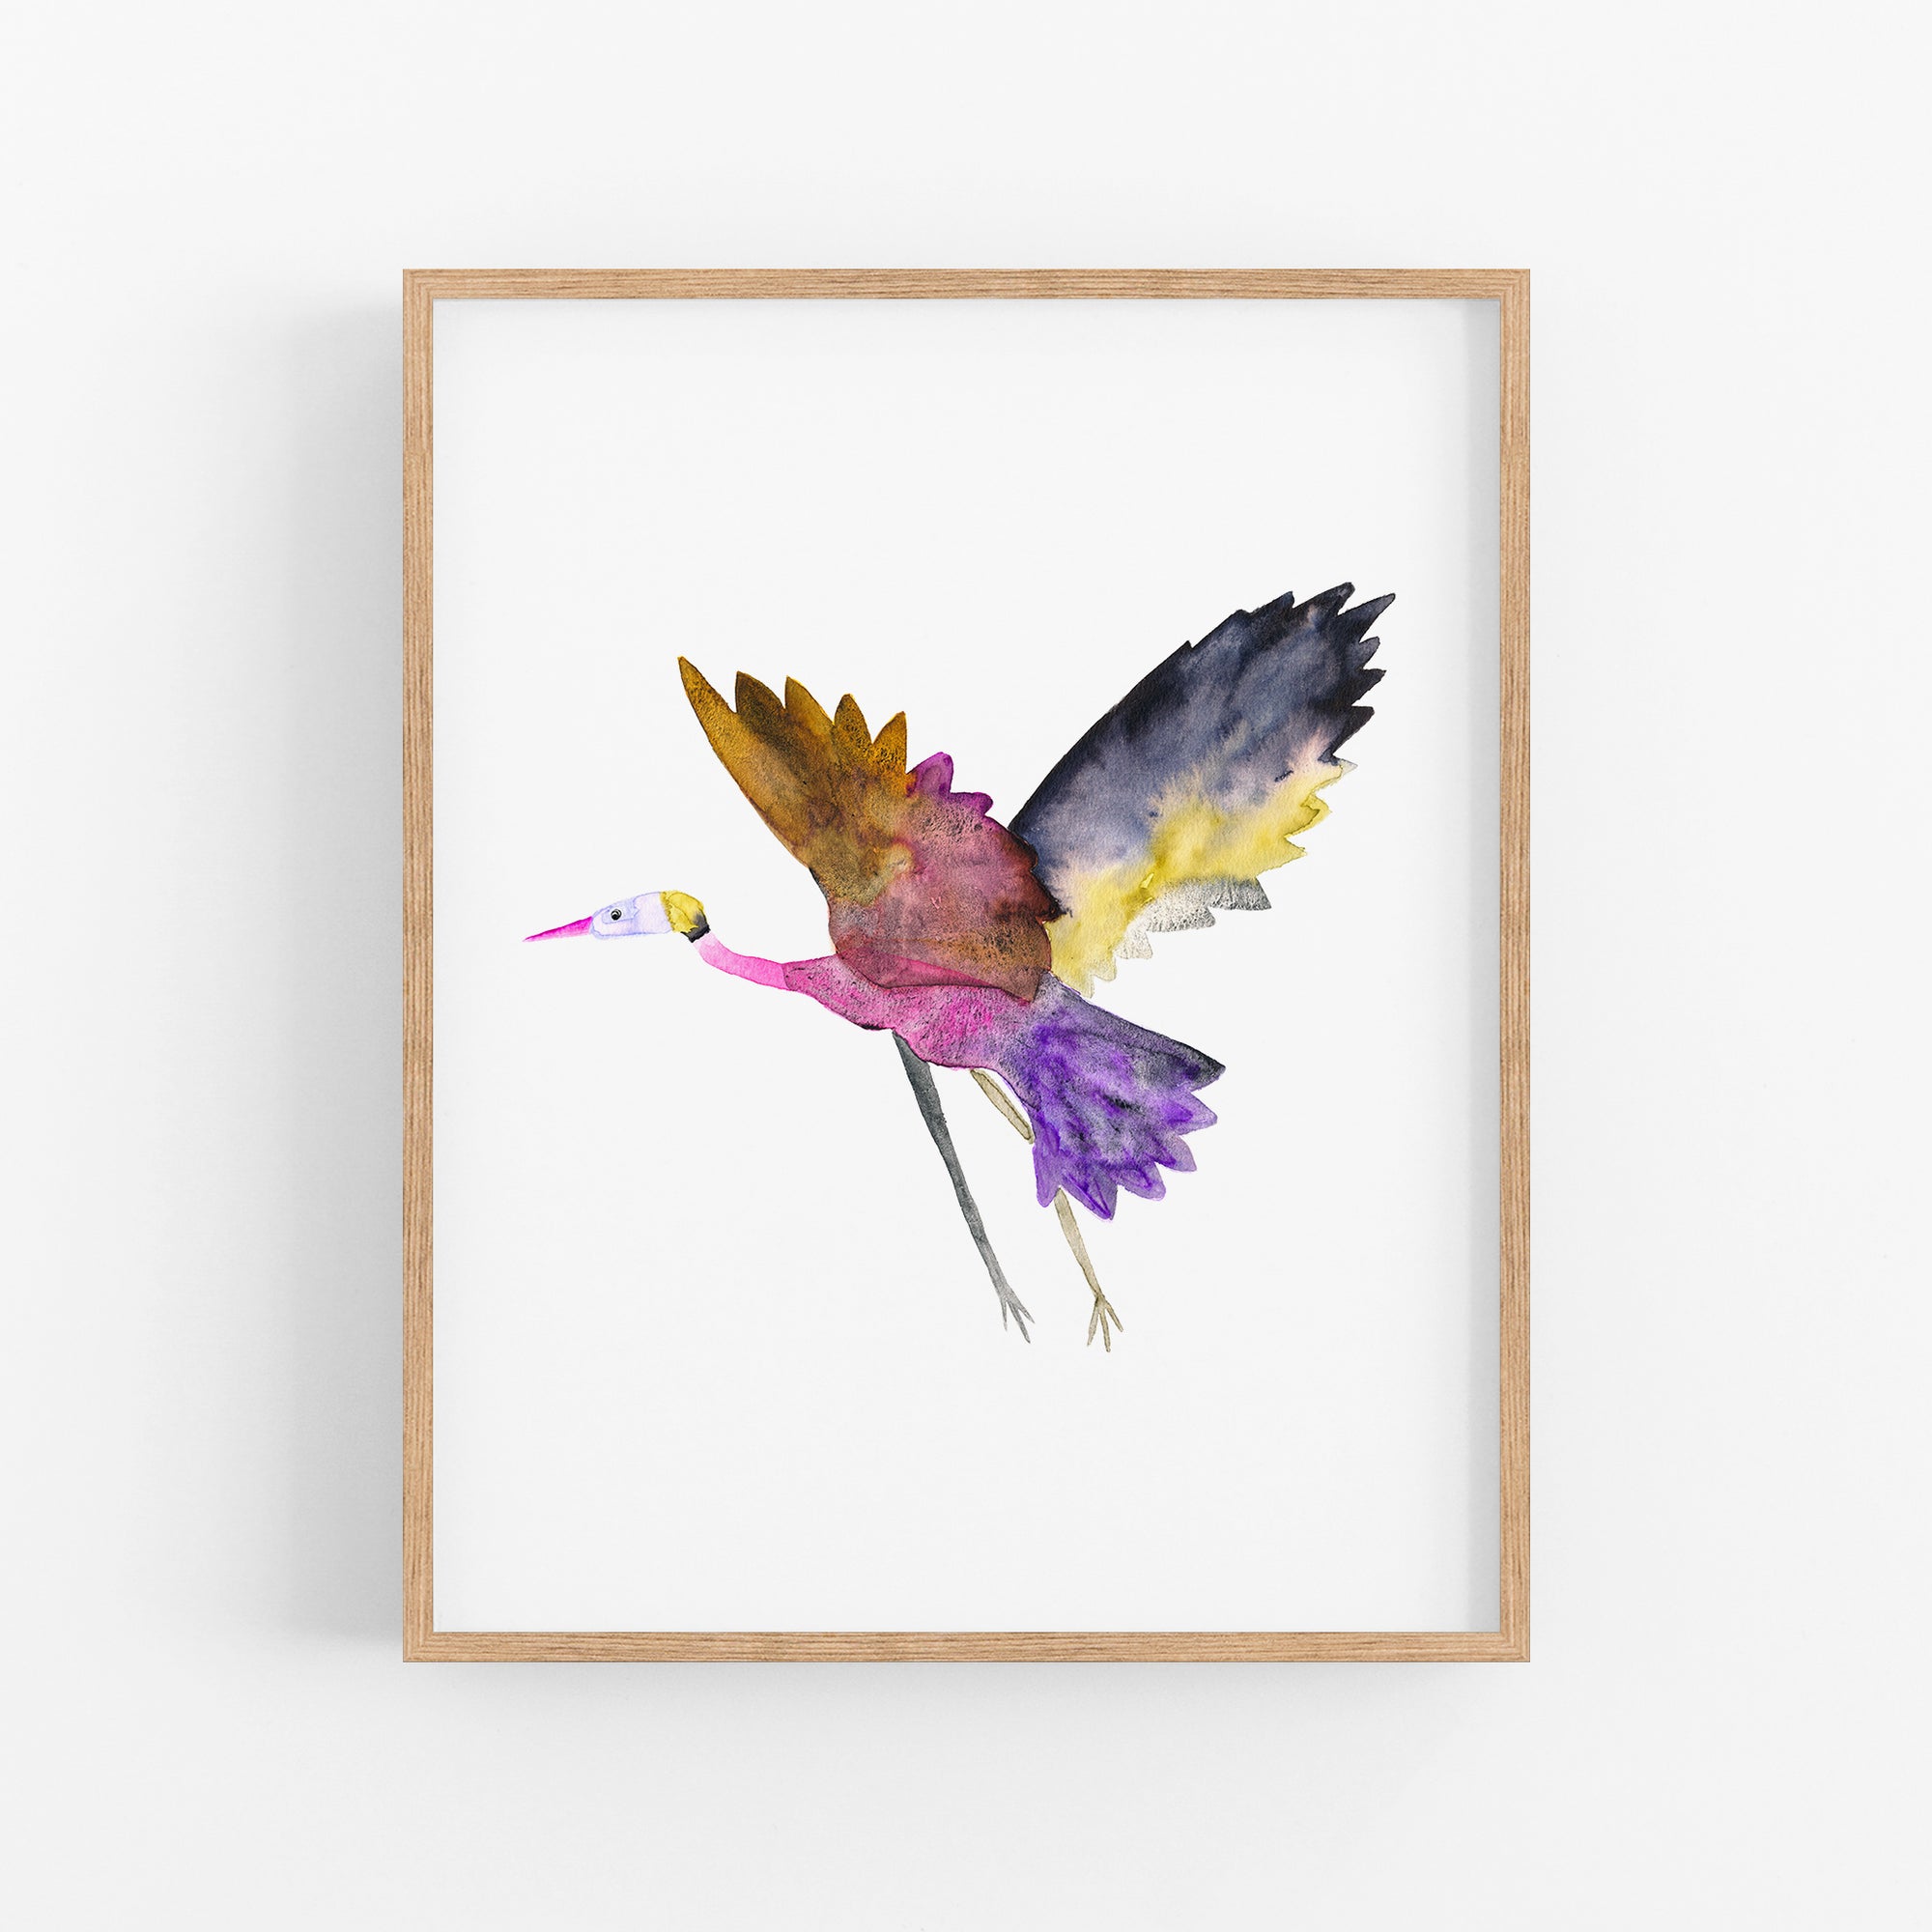 a watercolor painting of a bird flying